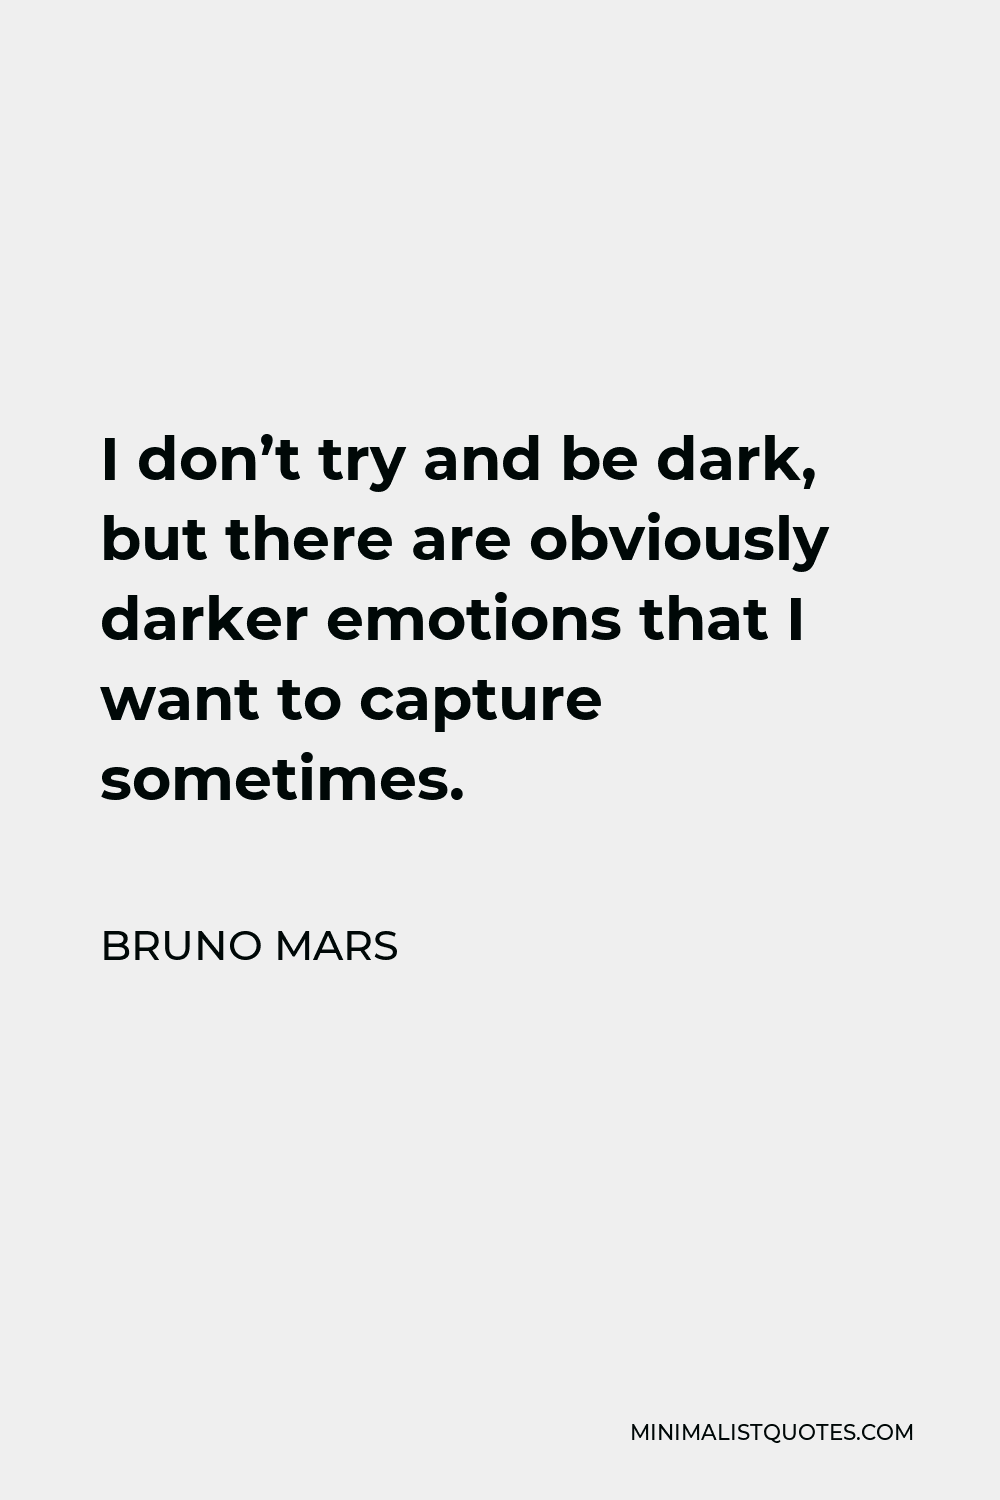 Bruno Mars Quote - I don’t try and be dark, but there are obviously darker emotions that I want to capture sometimes.